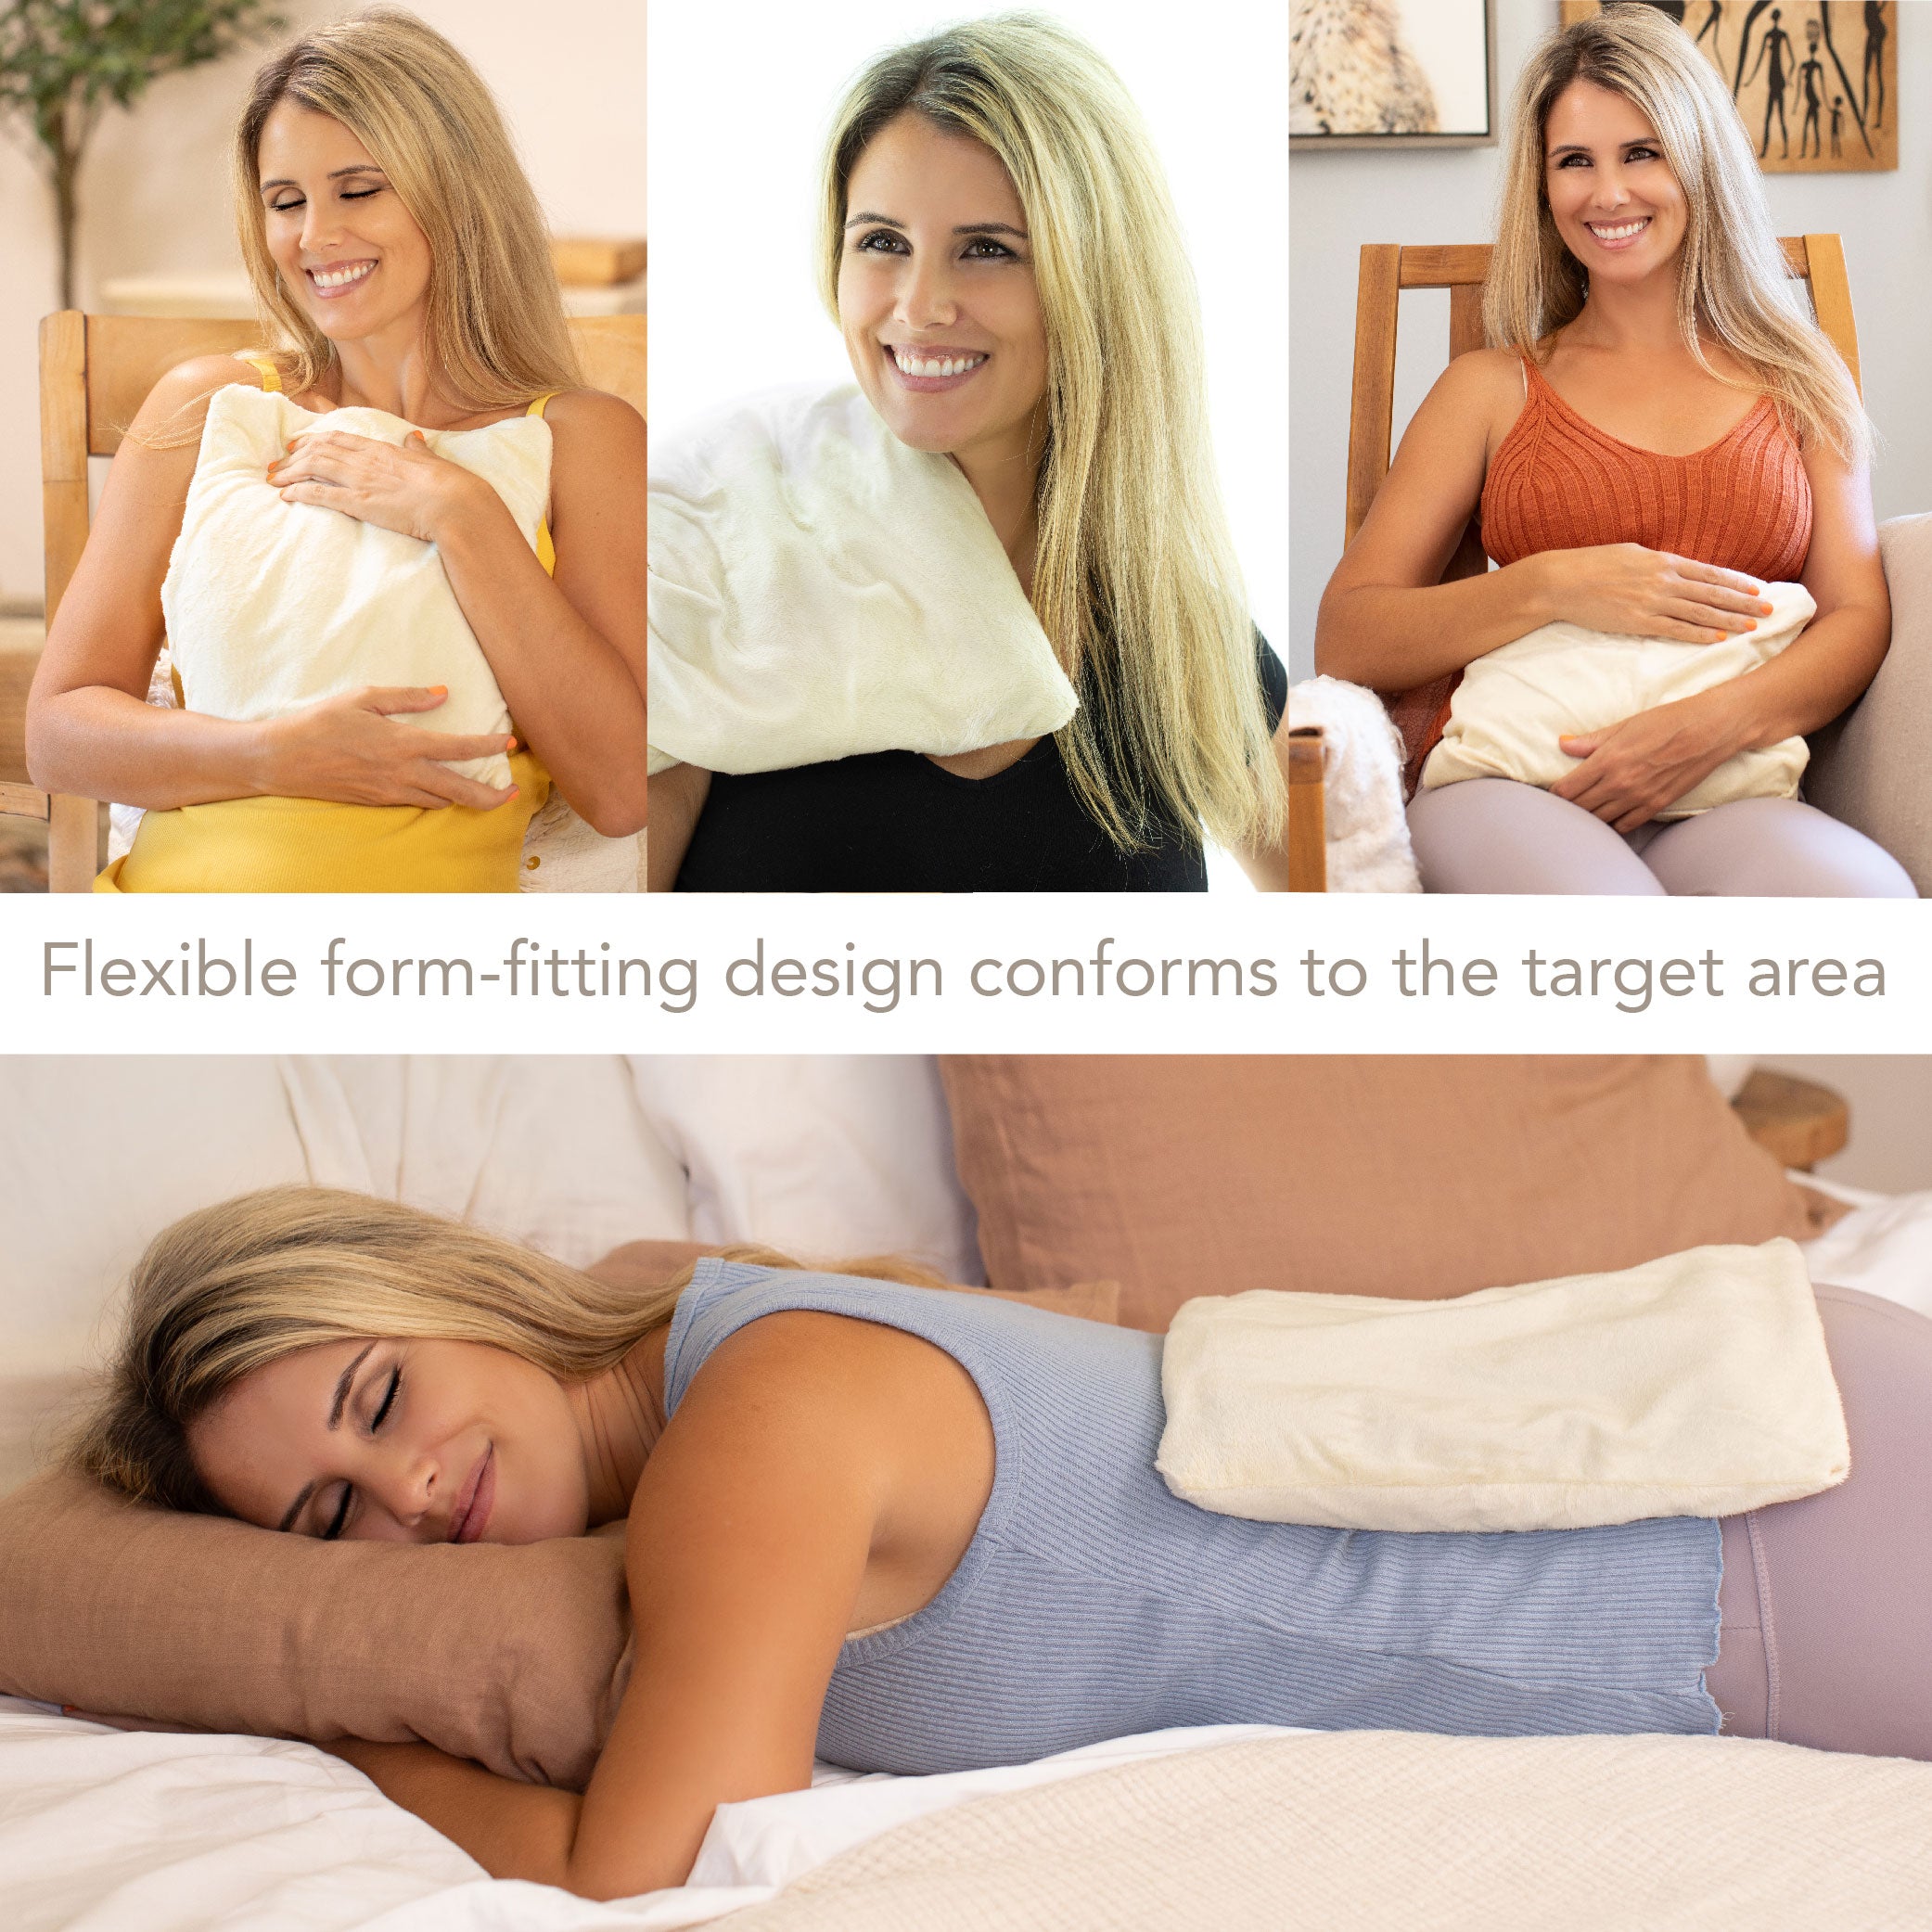 Bed Buddy Comfort Pack - Carex Health Brands